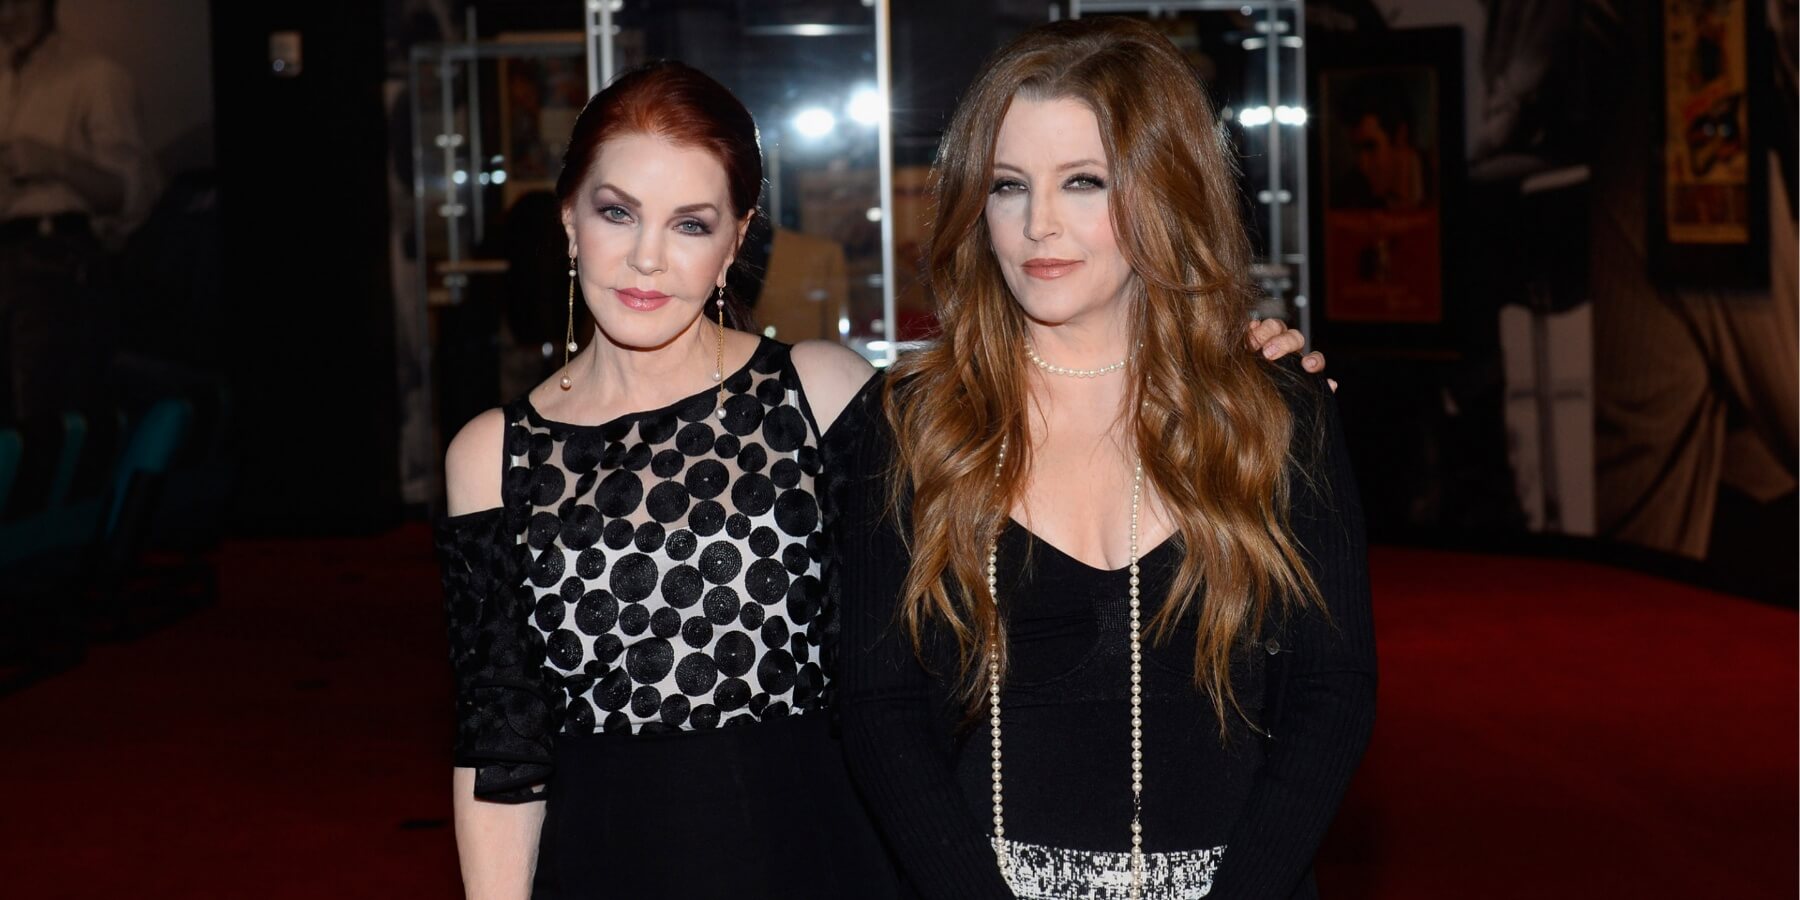 Priscilla Presley and Lisa Marie Presley photographed together in 2015 in Las Vegas, Nevada.